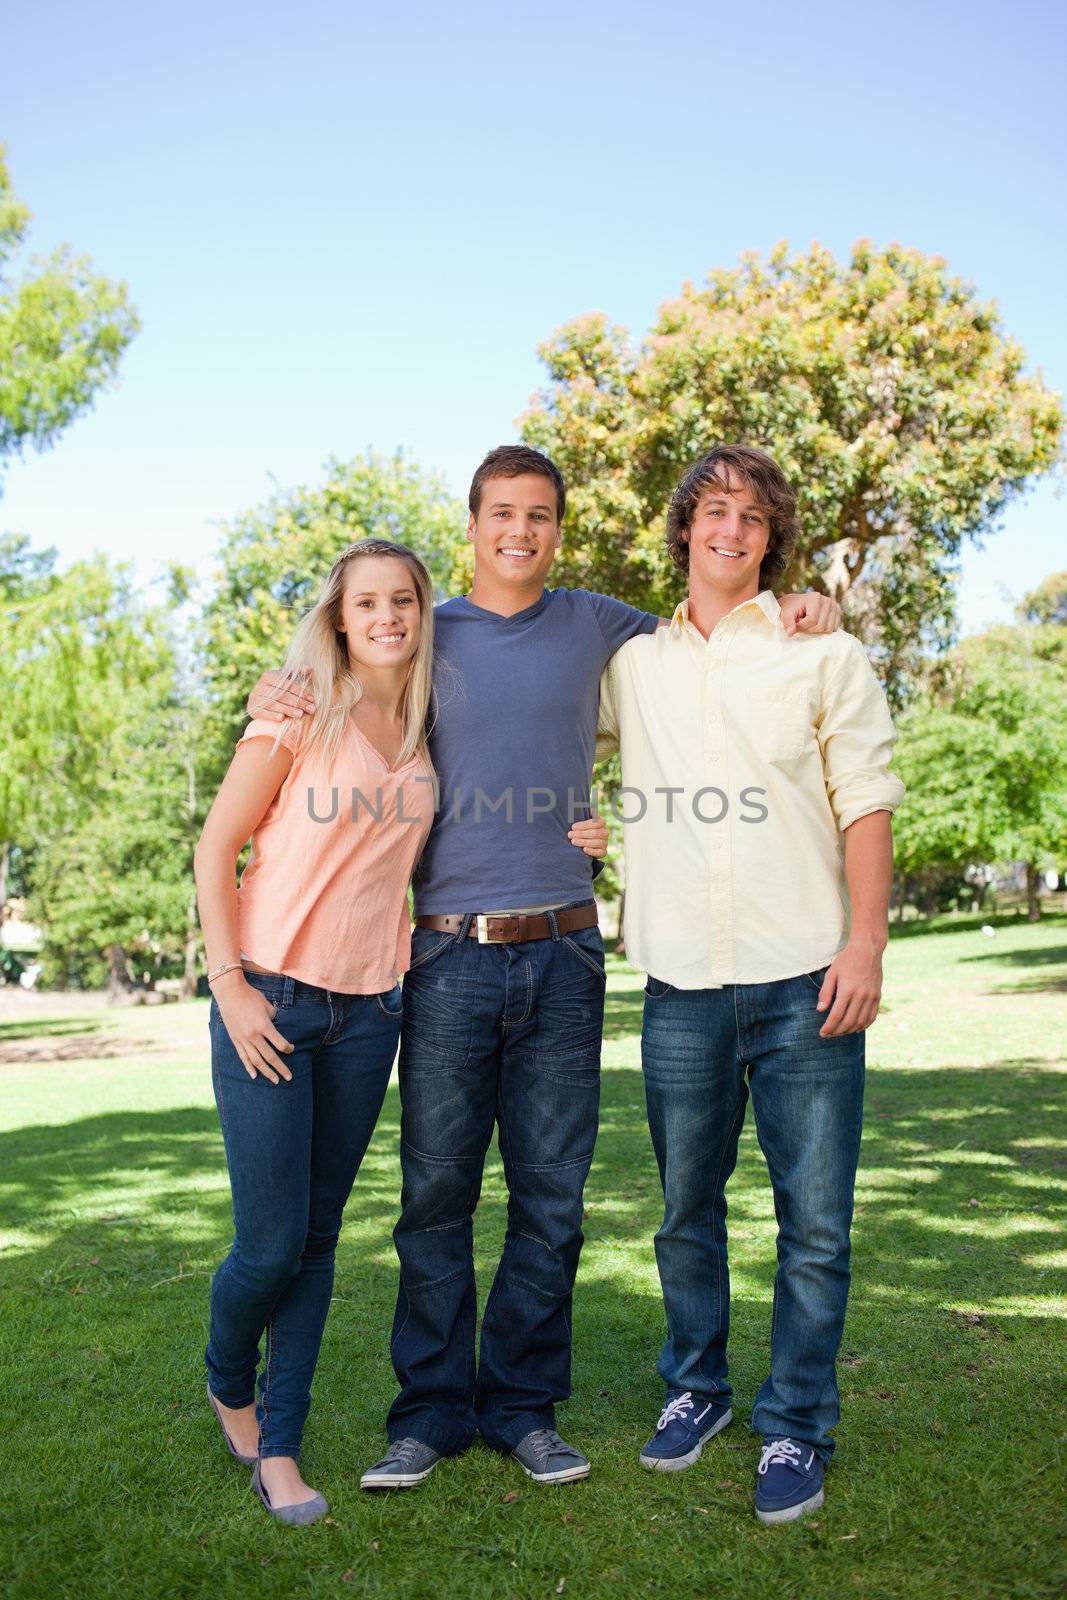 Three smiling students standing in a park together